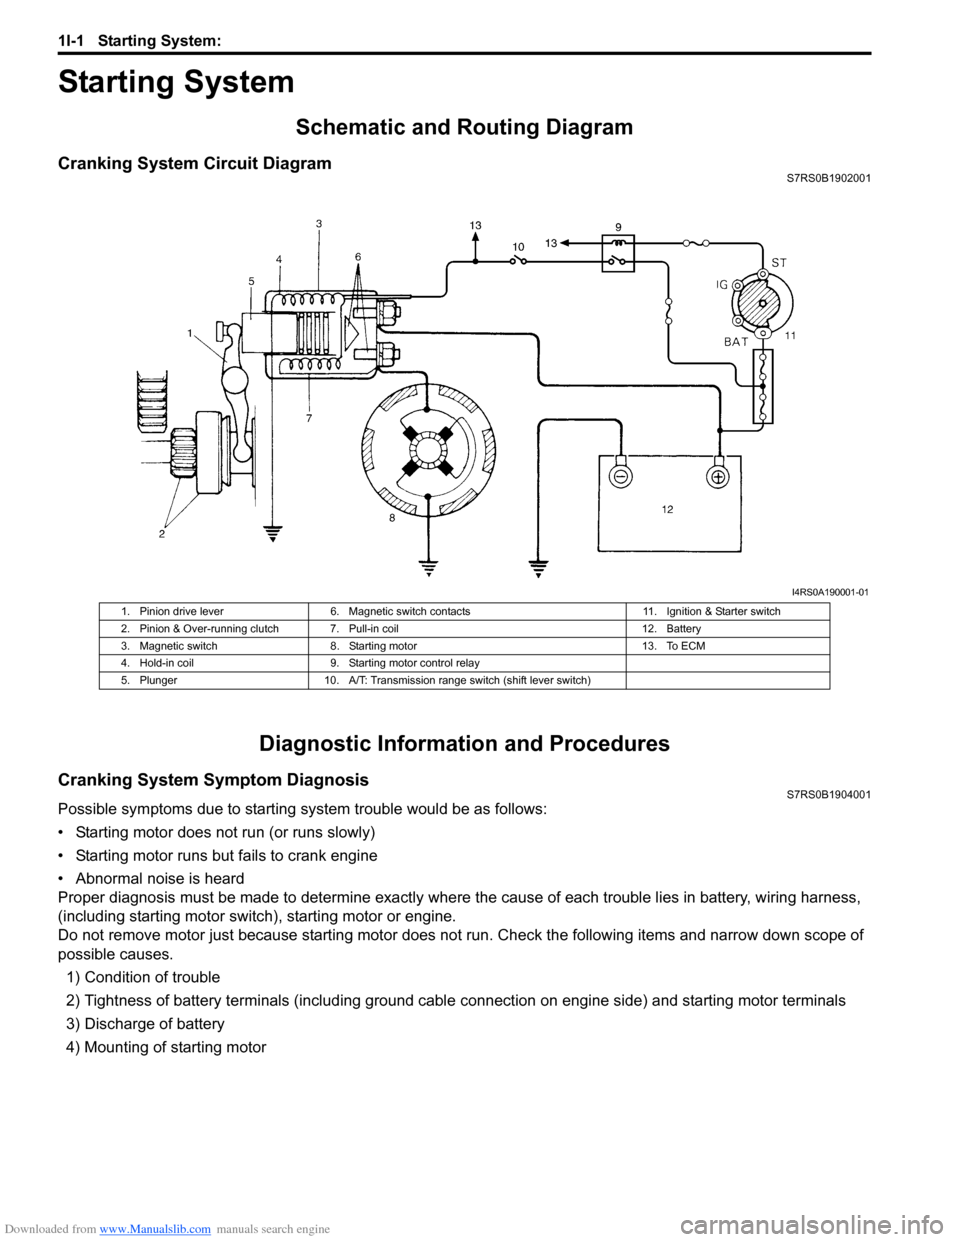 SUZUKI SWIFT 2007 2.G Service Workshop Manual Downloaded from www.Manualslib.com manuals search engine 1I-1 Starting System: 
Engine
Starting System
Schematic and Routing Diagram
Cranking System Circuit DiagramS7RS0B1902001
Diagnostic Information